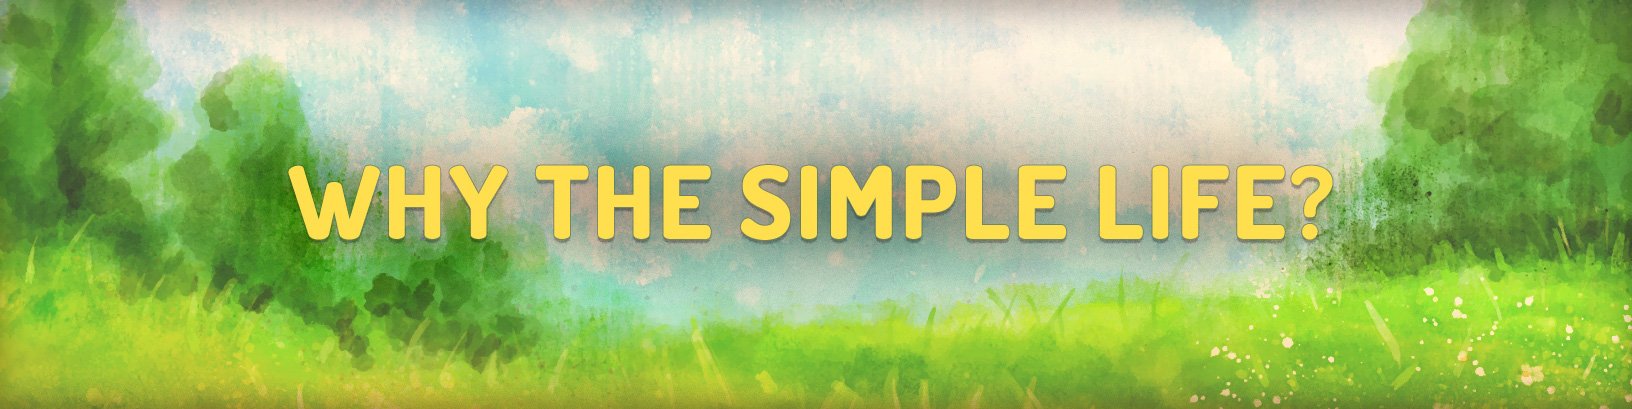 Why the Simple Life?